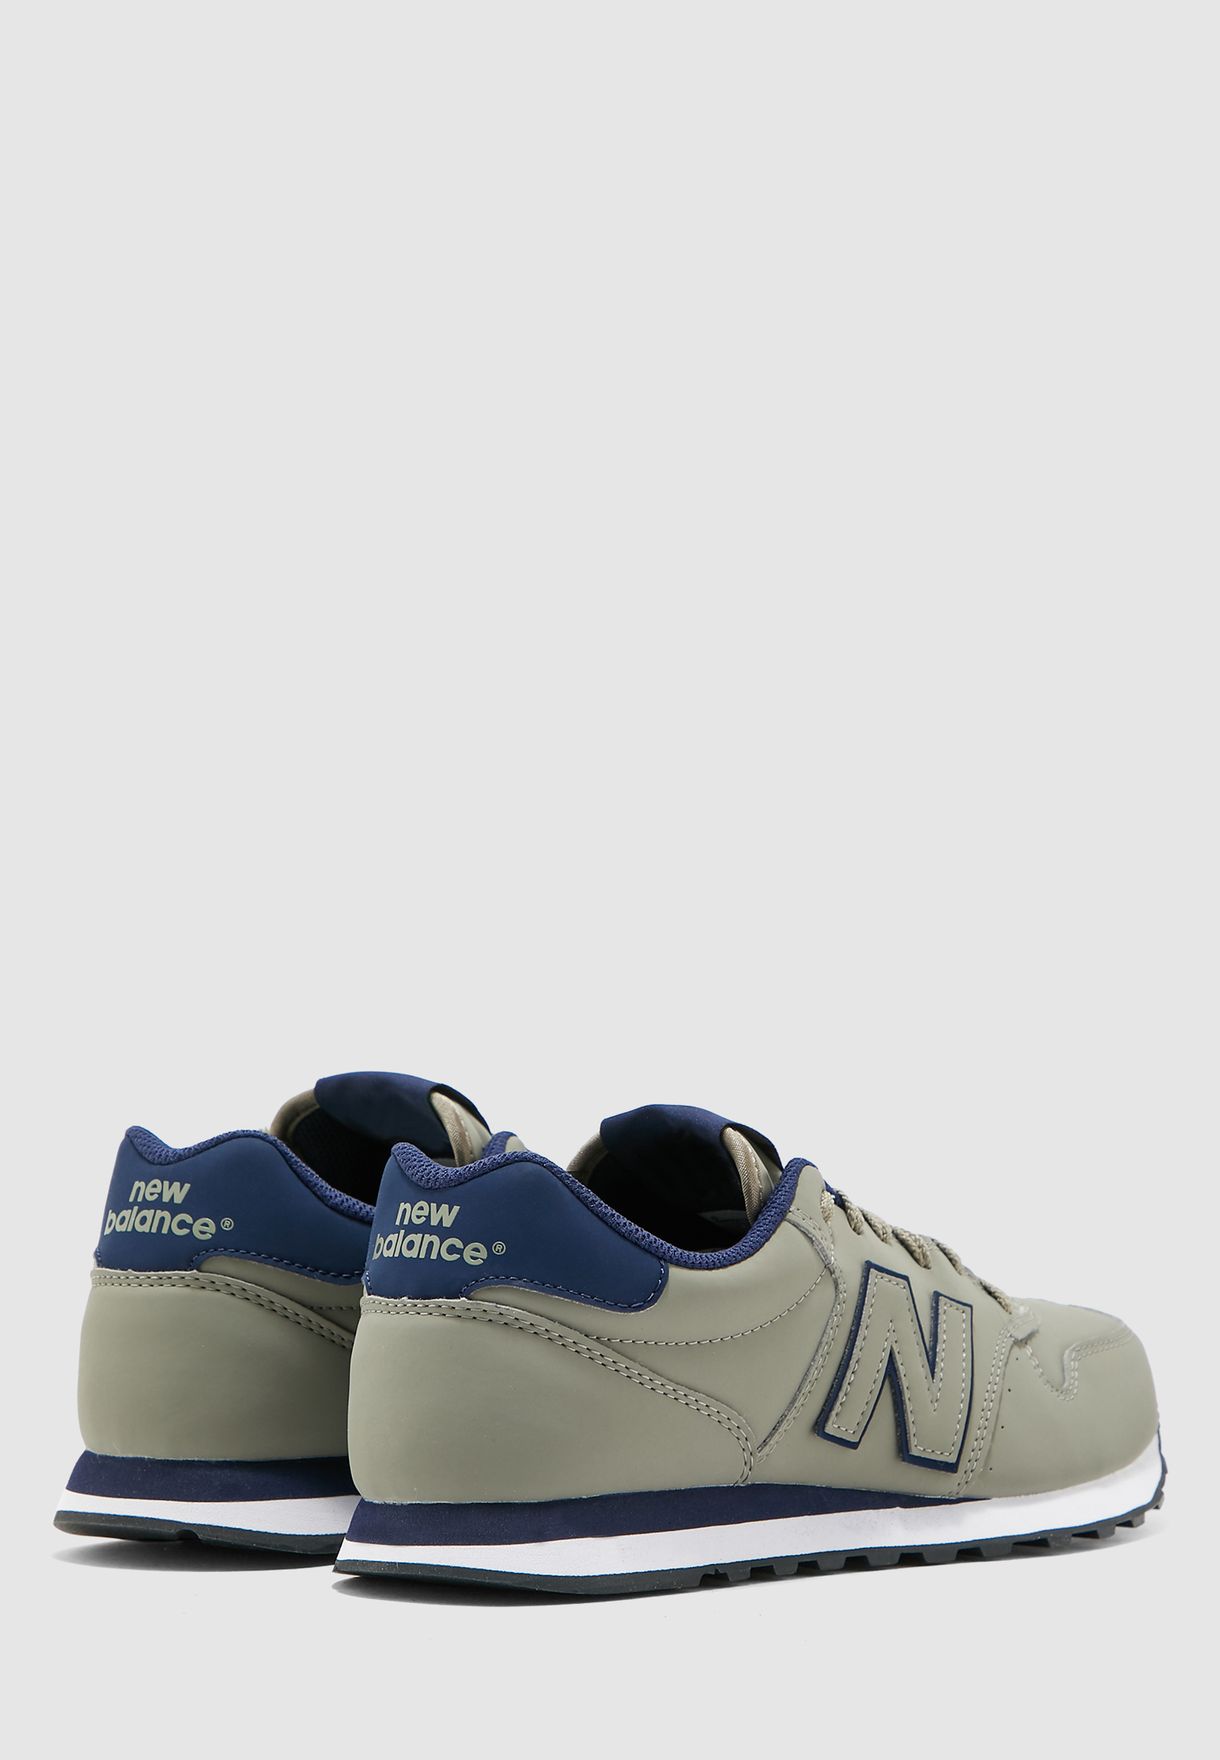 nb 500 leather